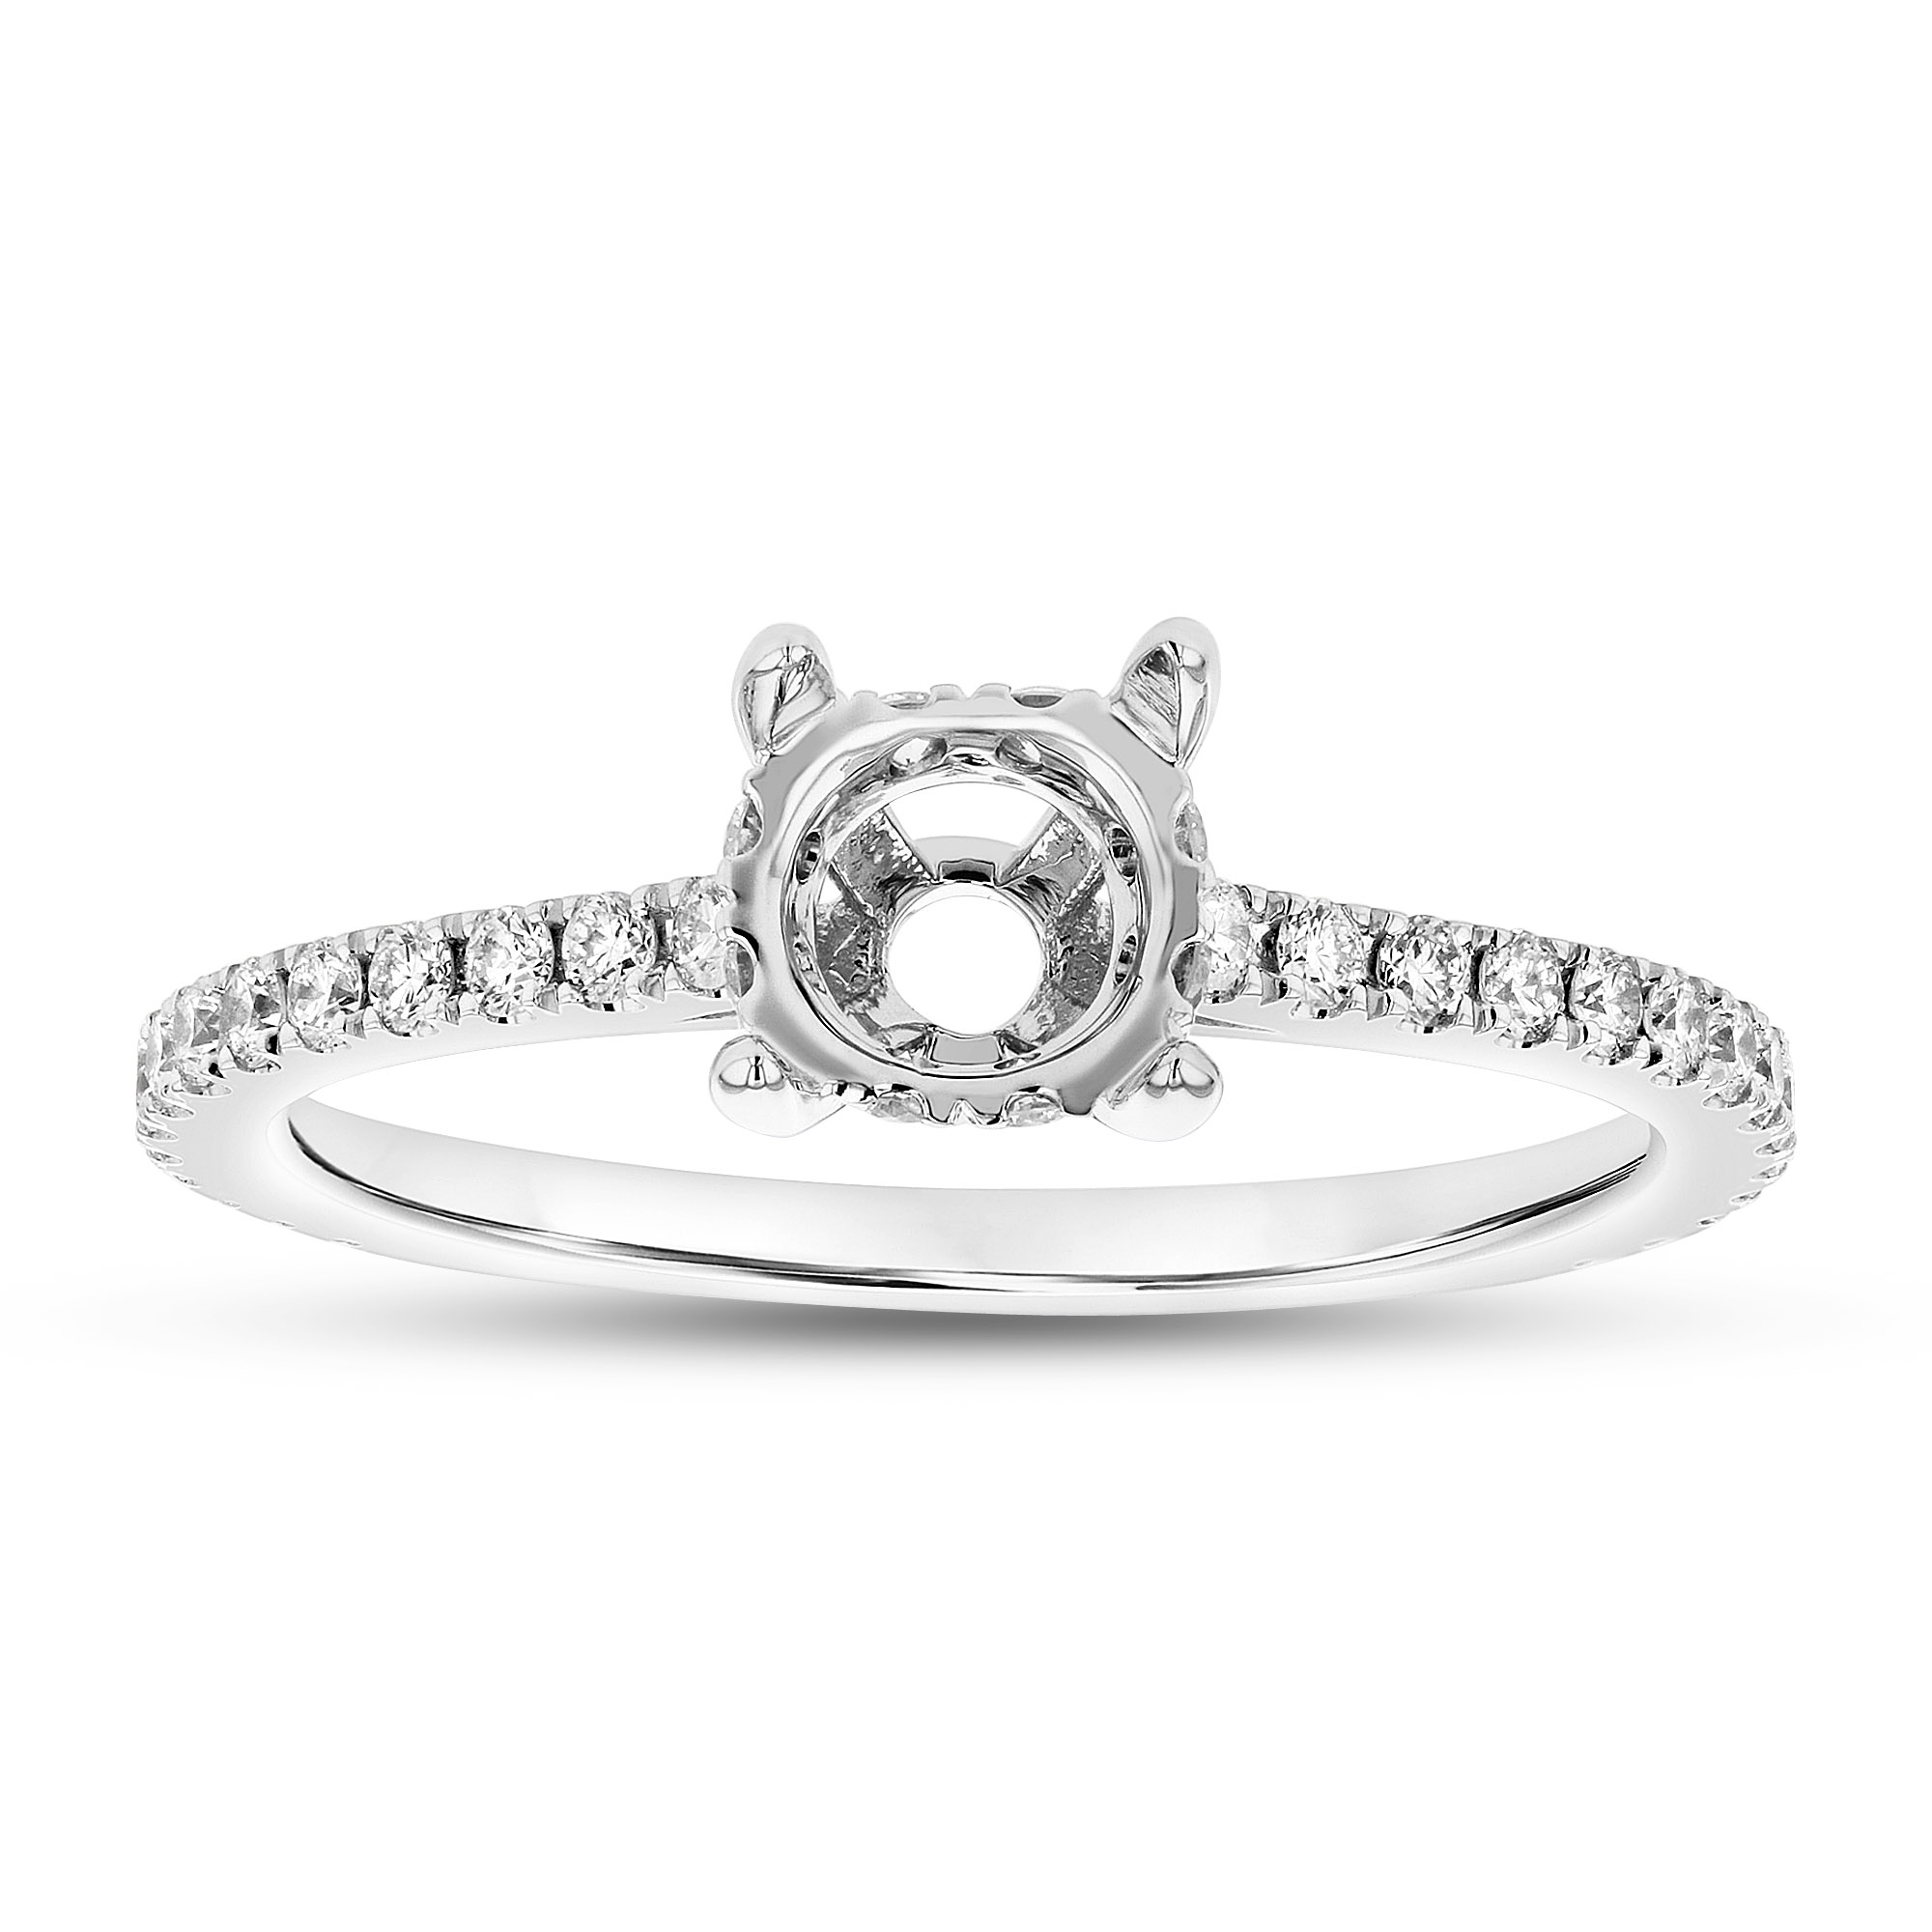 View 0.37ctw Diamond Semi Mount Engagement Ring in 14k White Gold